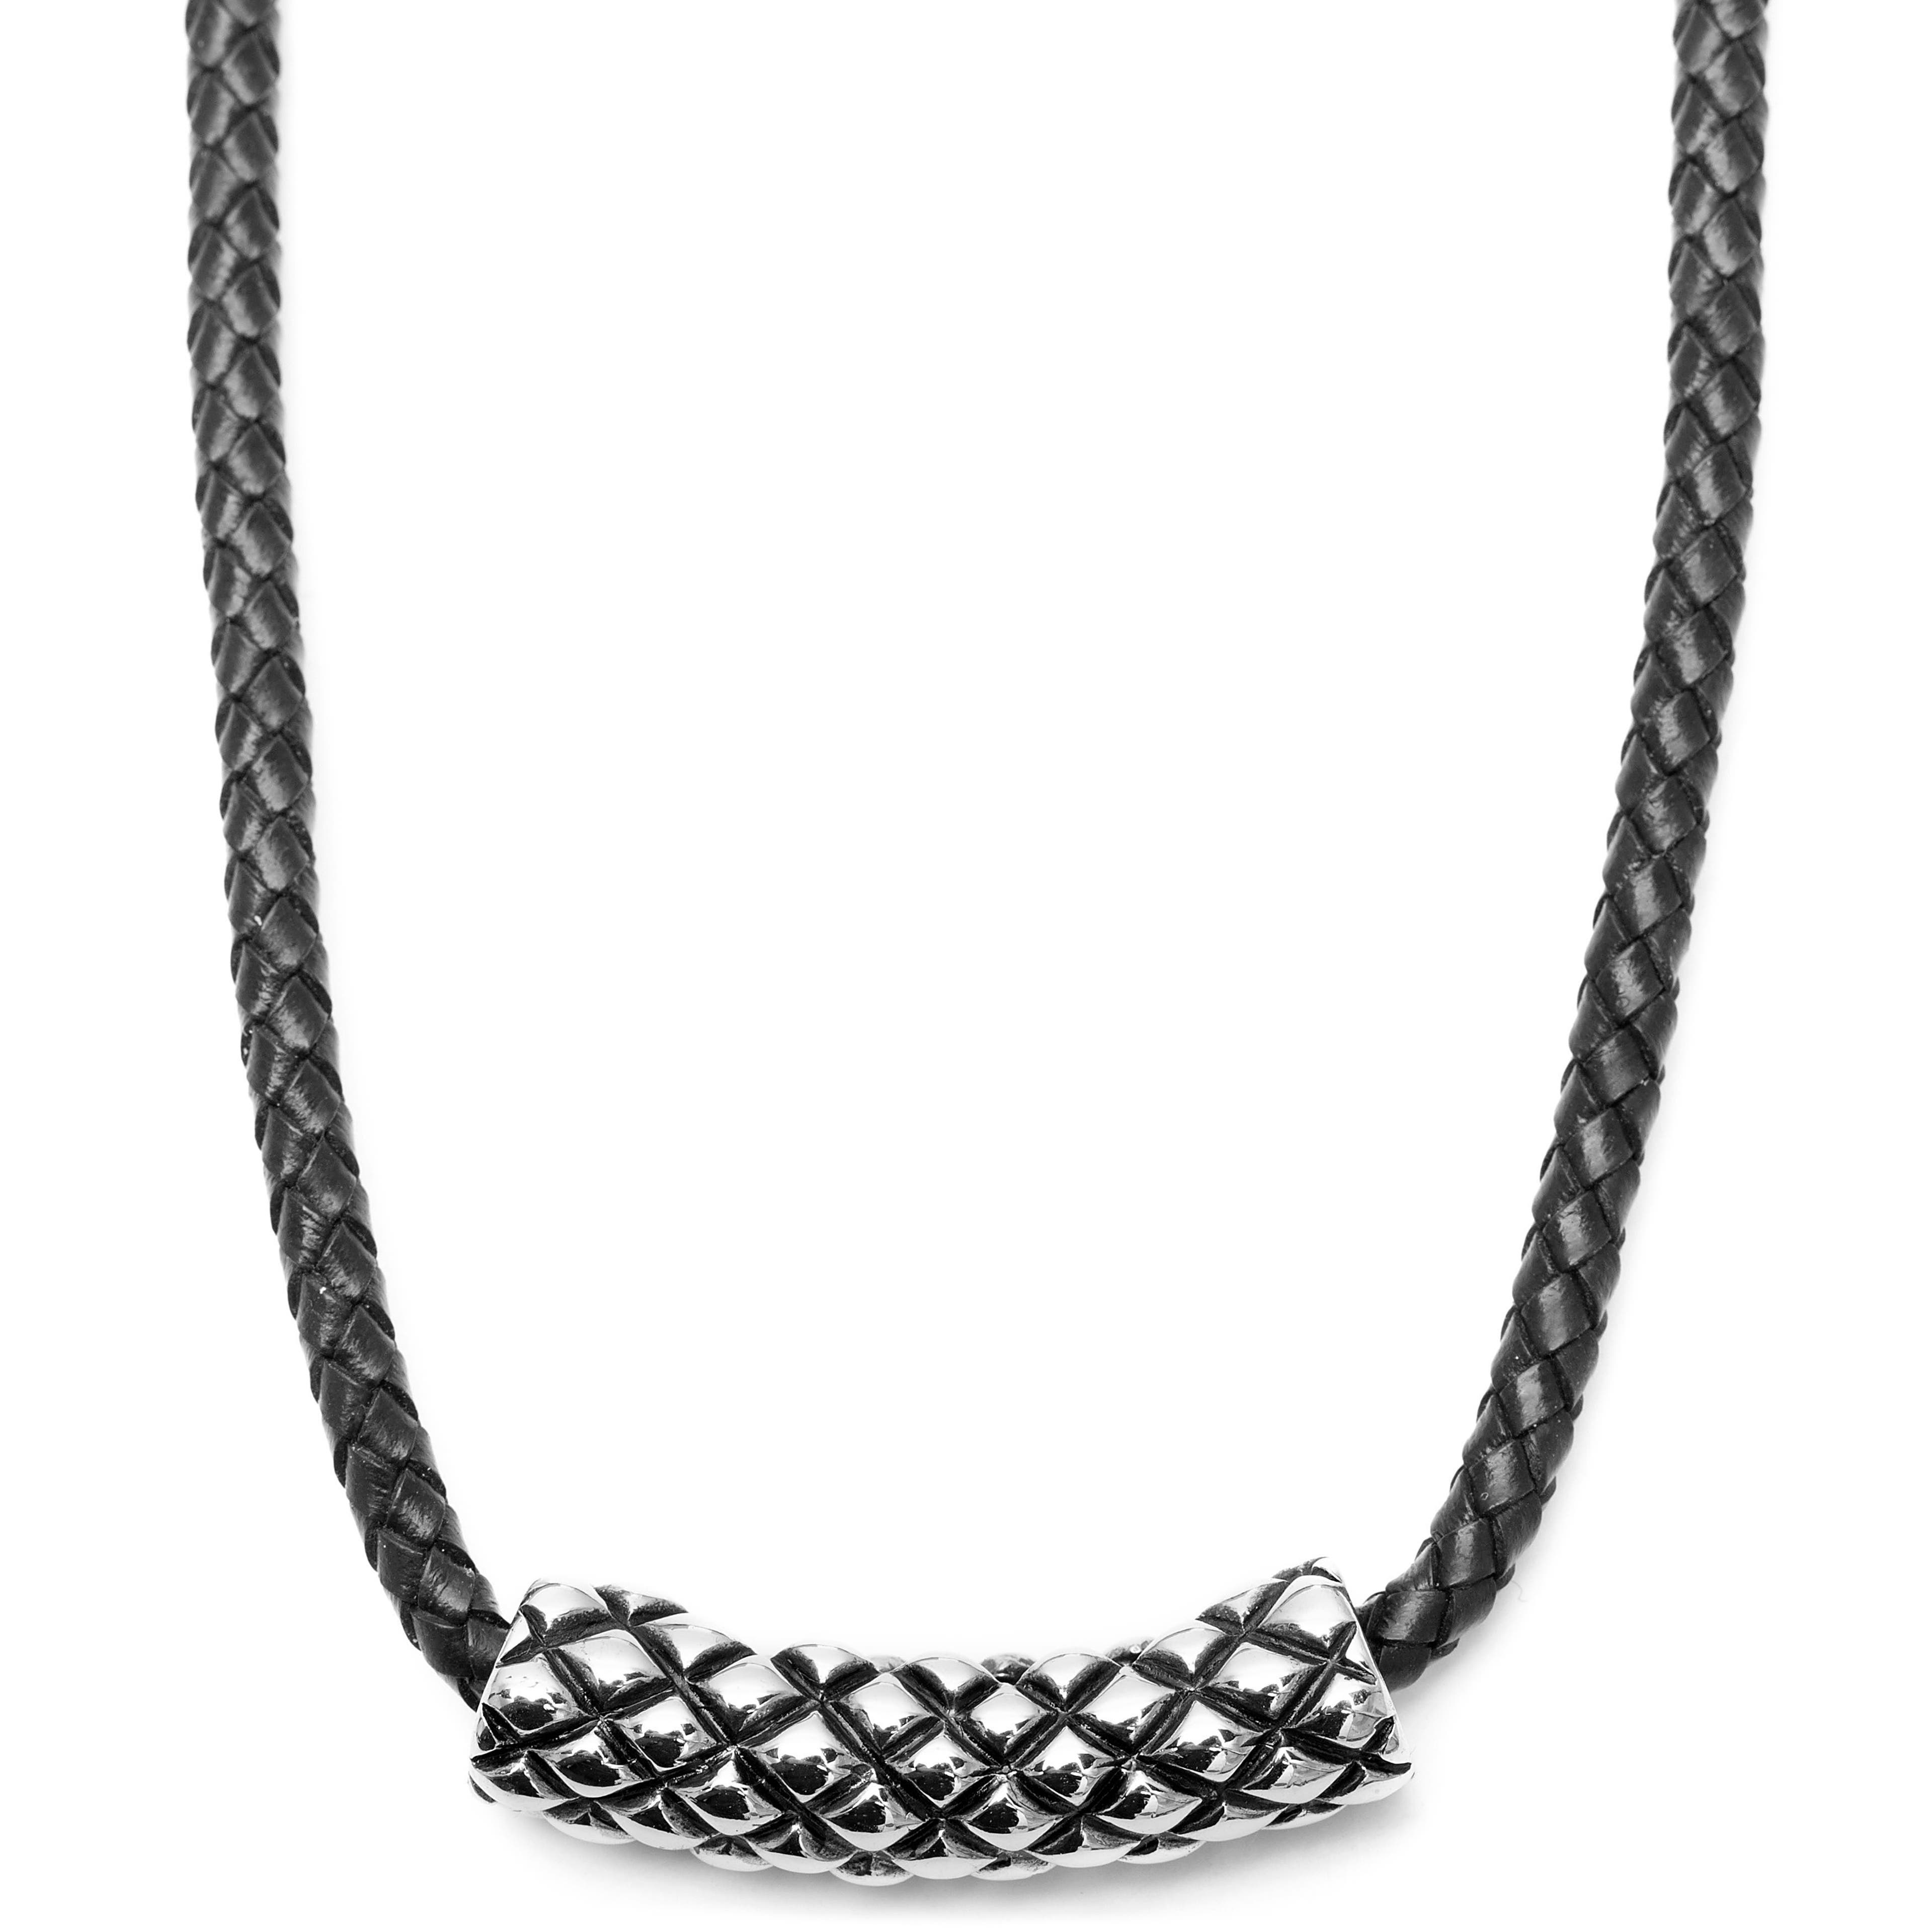 Criss Cross Black Leather Necklace